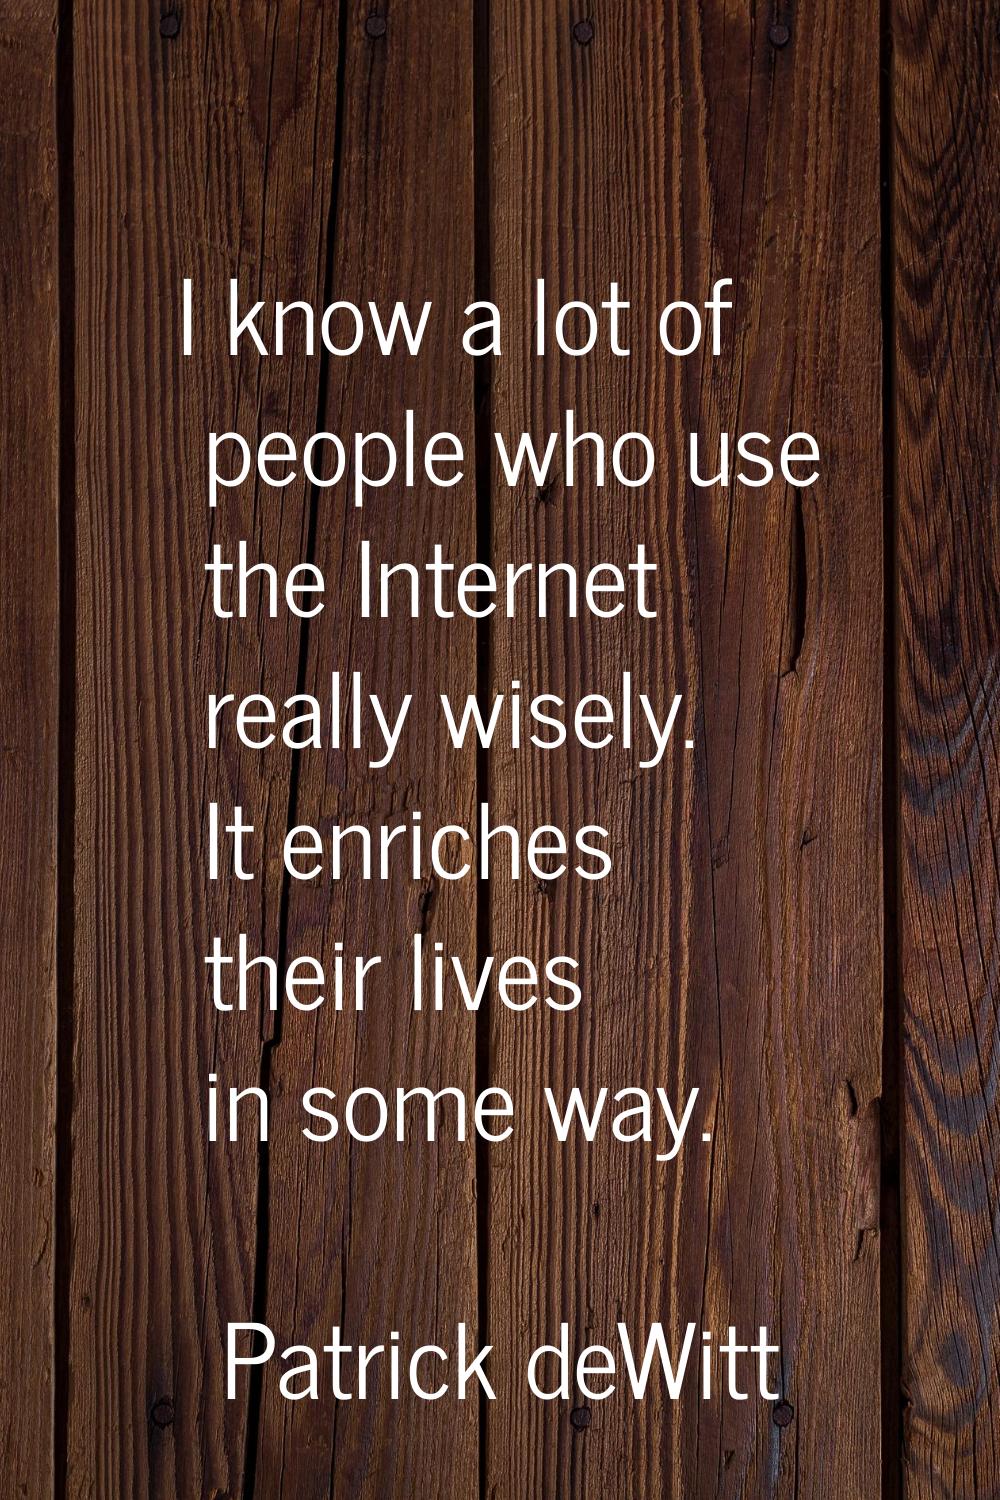 I know a lot of people who use the Internet really wisely. It enriches their lives in some way.